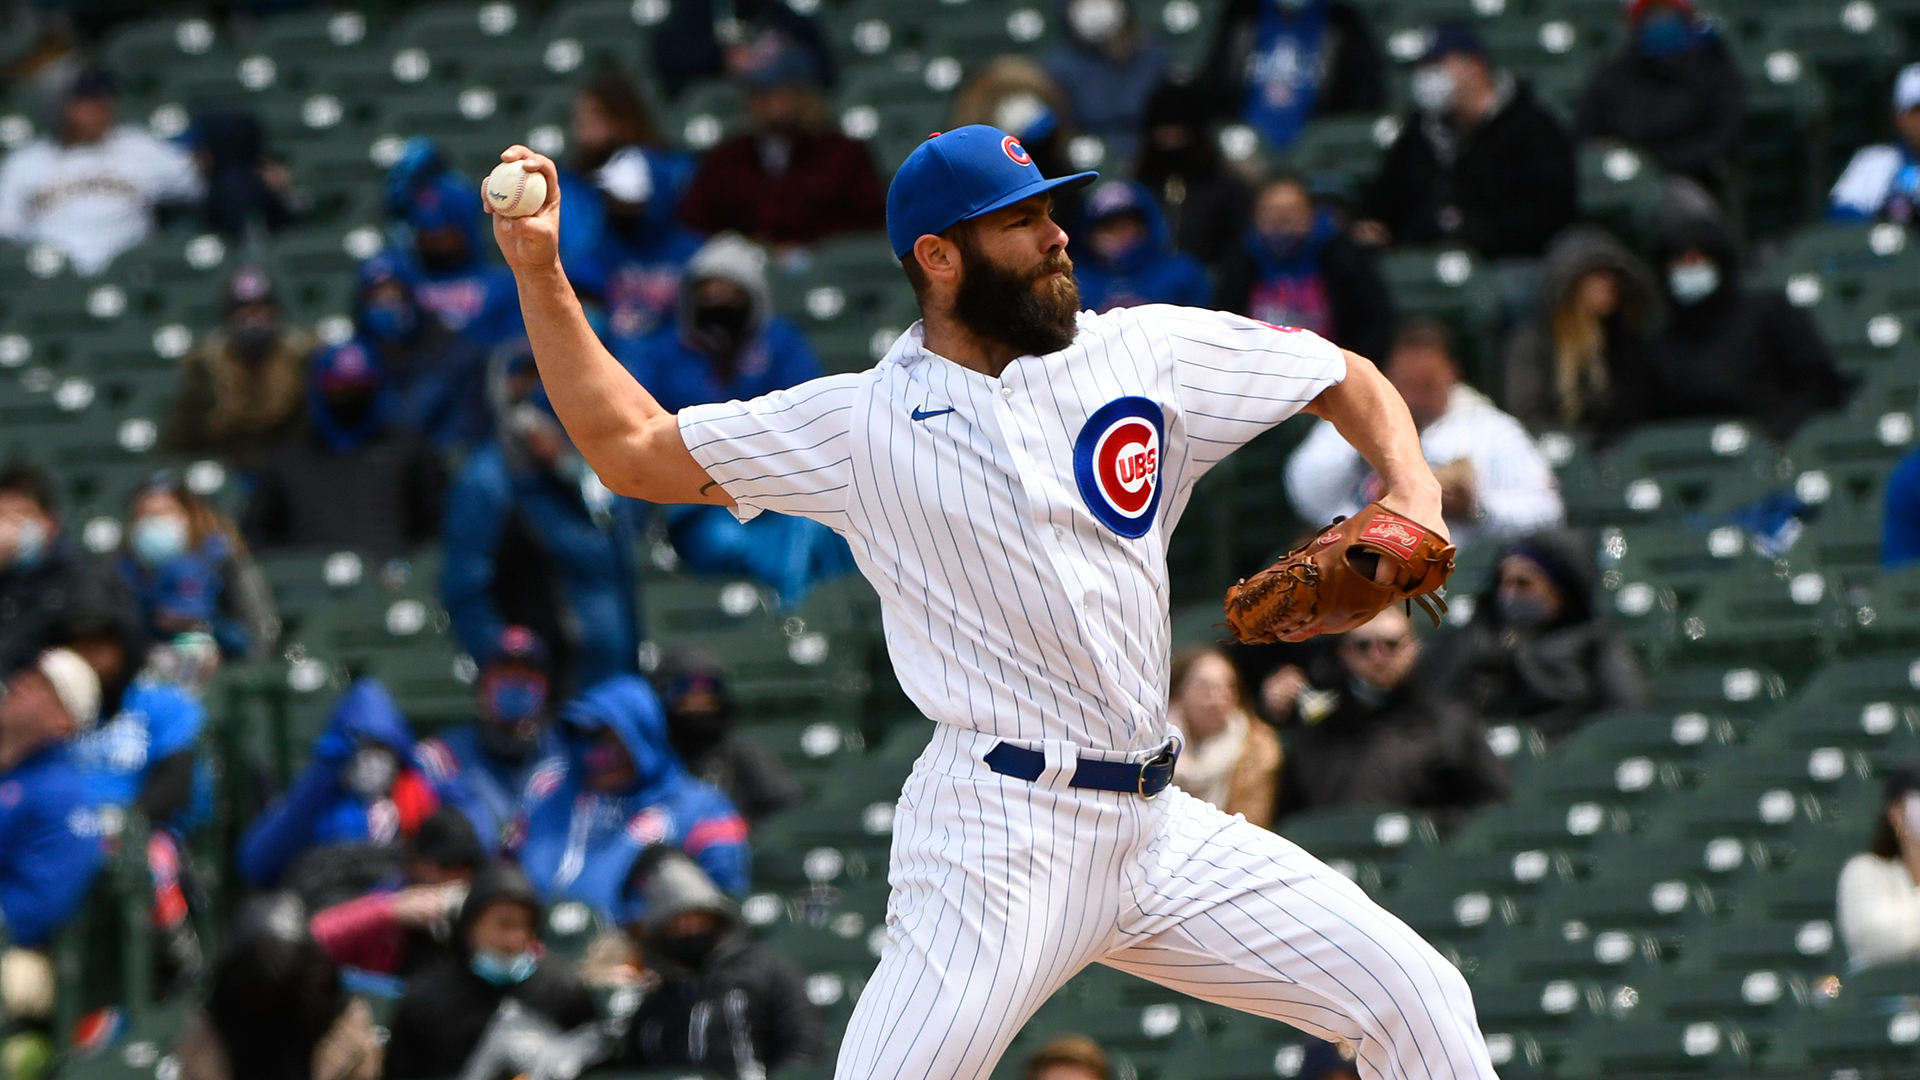 Jake Arrieta catches on with Padres after release by Cubs